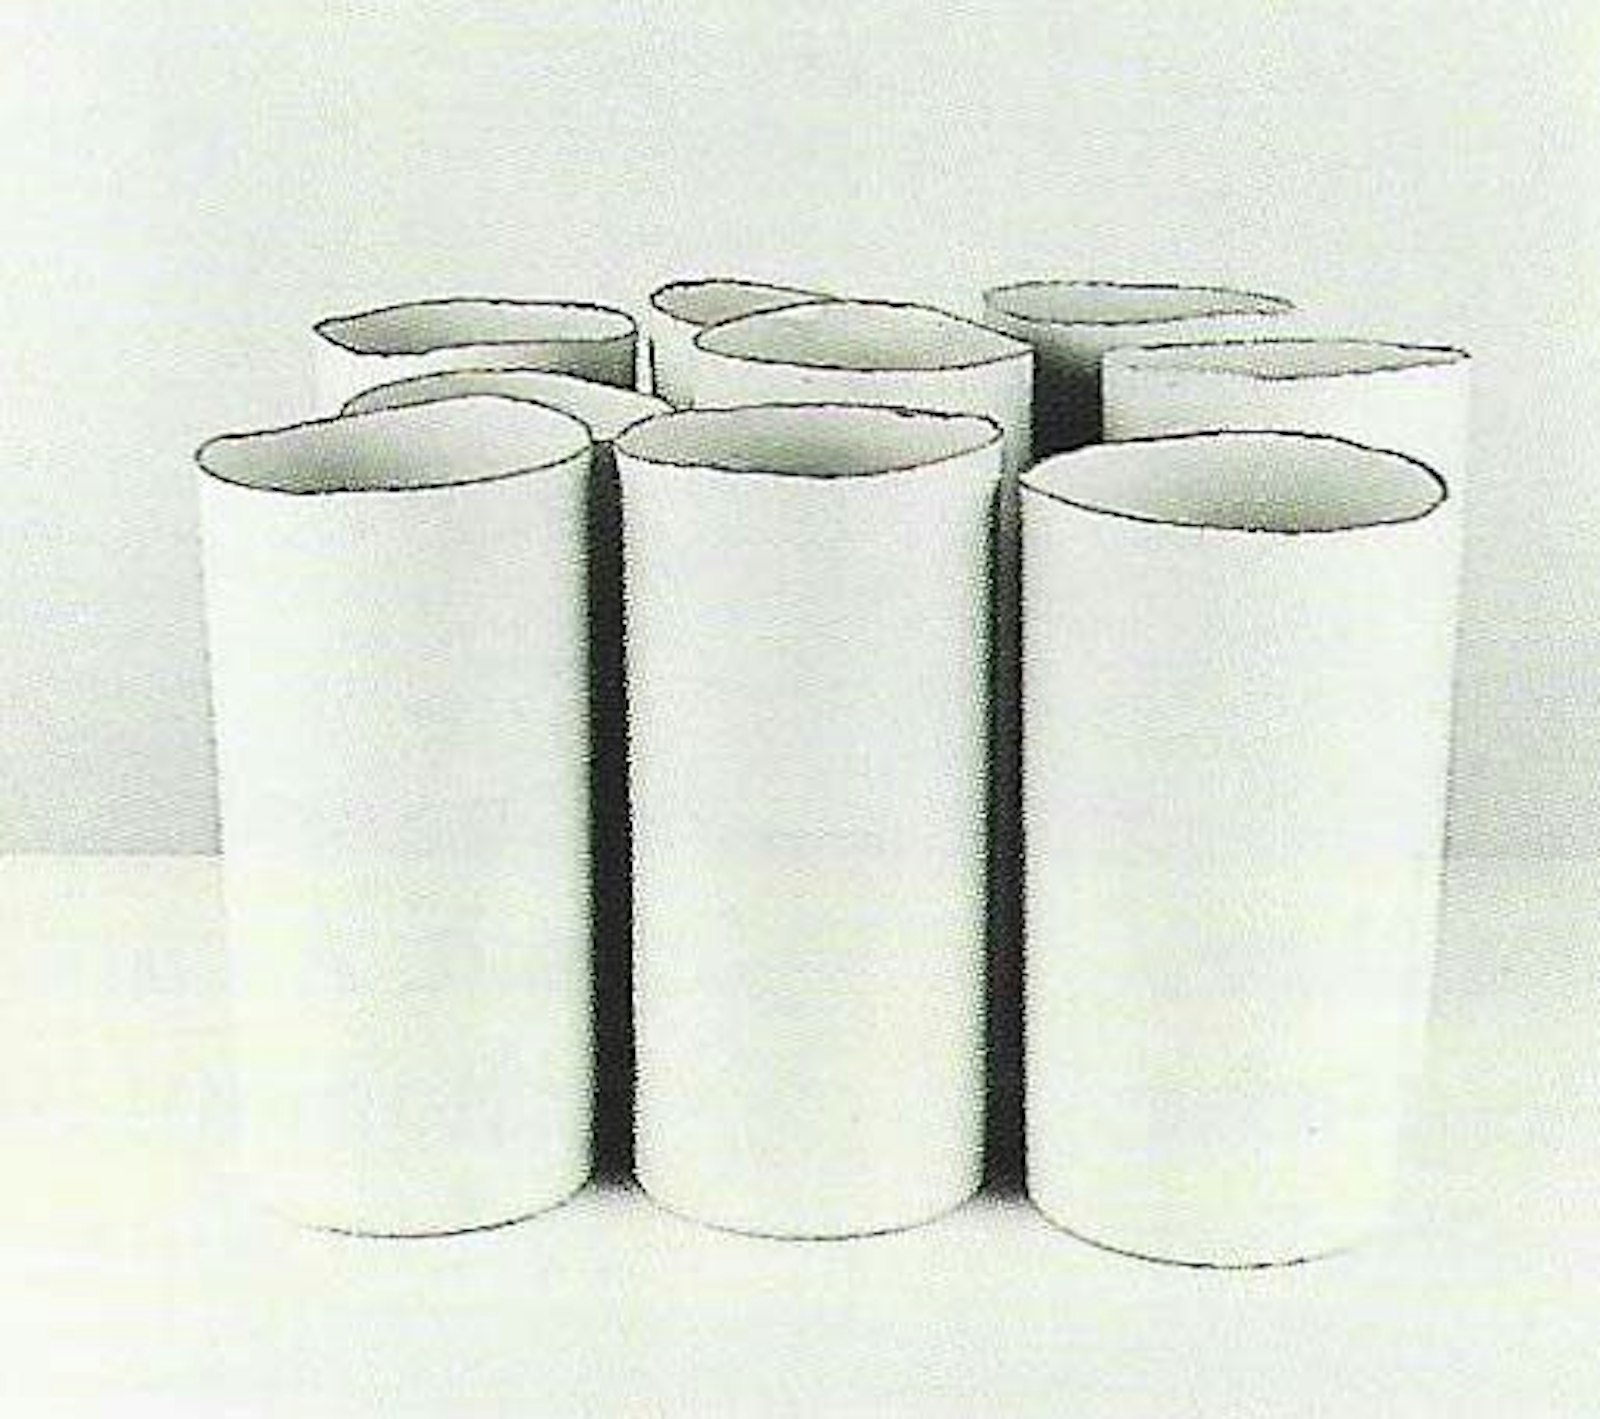 Series of vases, 1980, on which variations were made in 1987 and 1994.